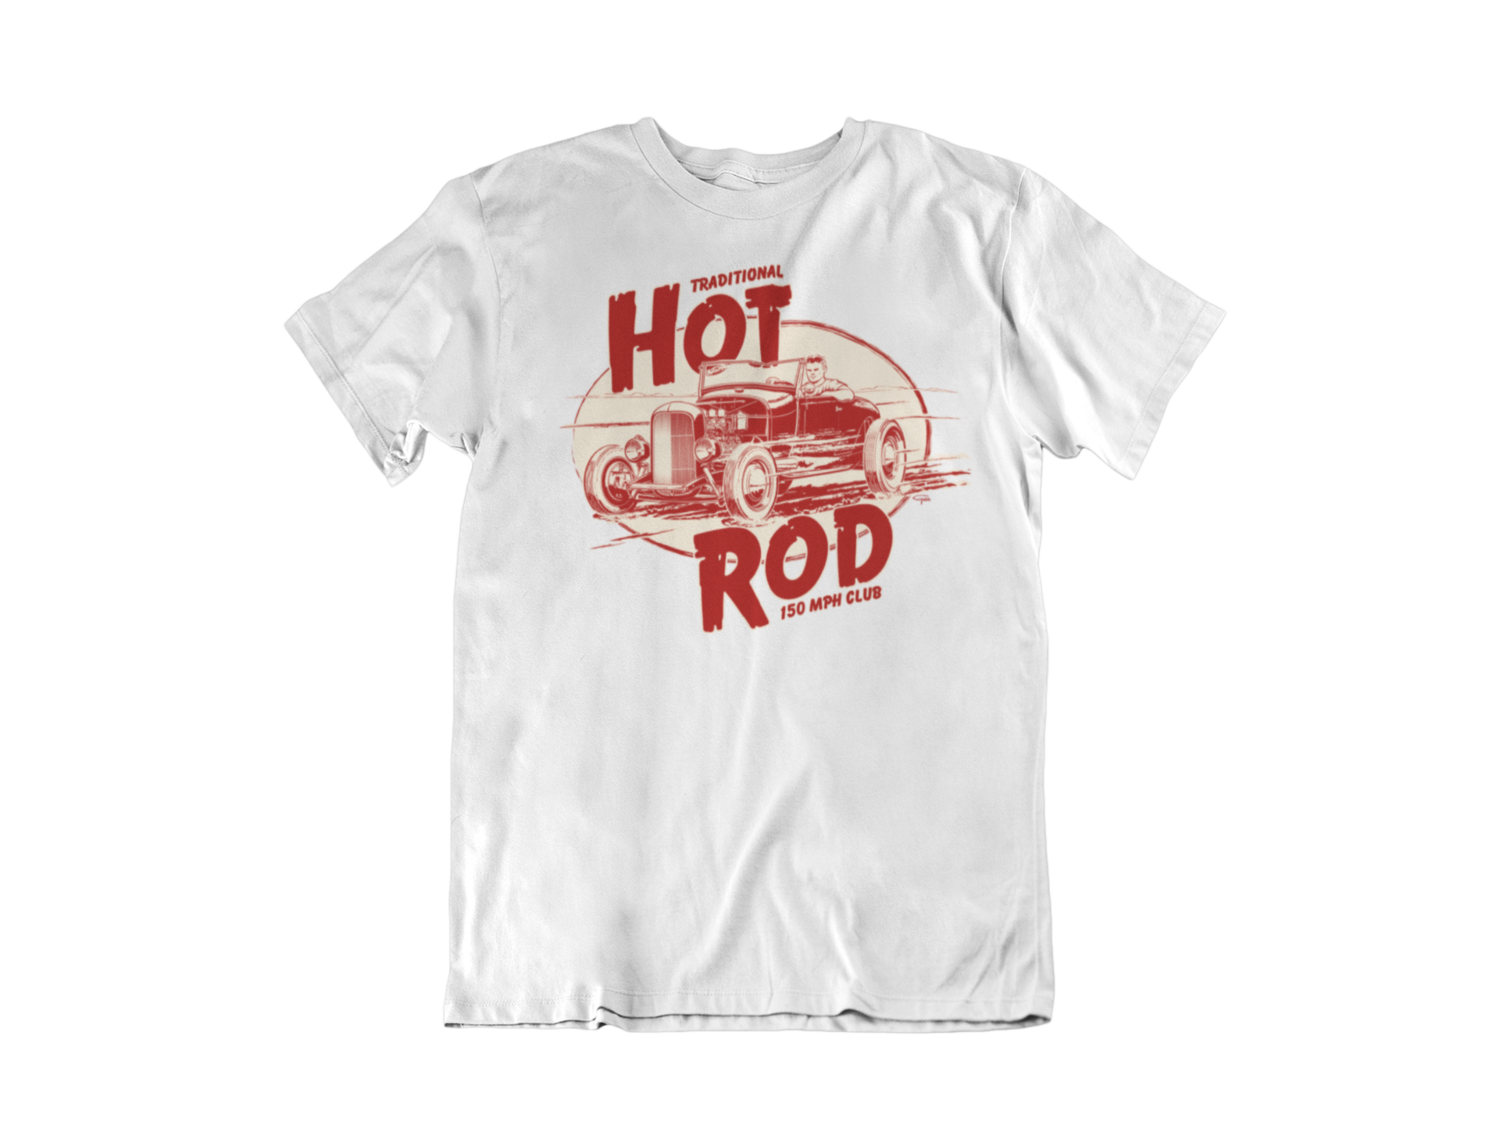 TRADITIONAL HOT ROD T-SHIRT MAN BY Ger "Dutch Courage" Peters artwork